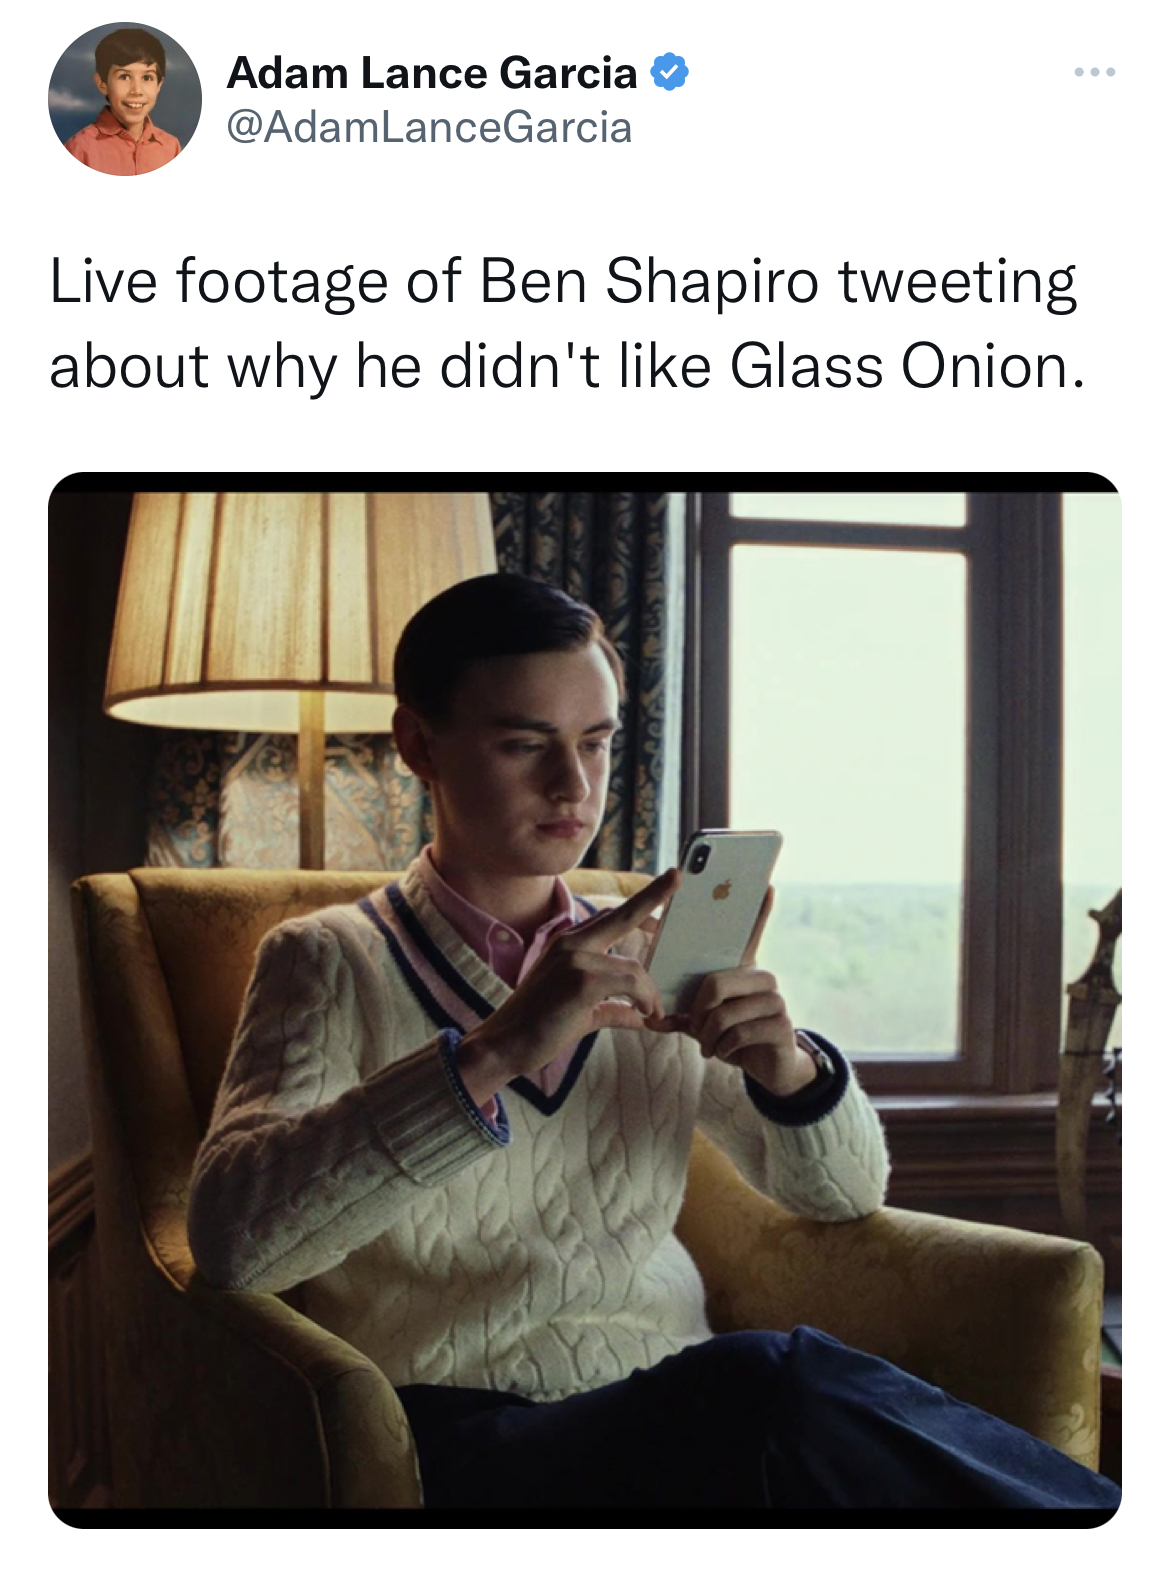 phones in knives out - Adam Lance Garcia A Live footage of Ben Shapiro tweeting about why he didn't Glass Onion.